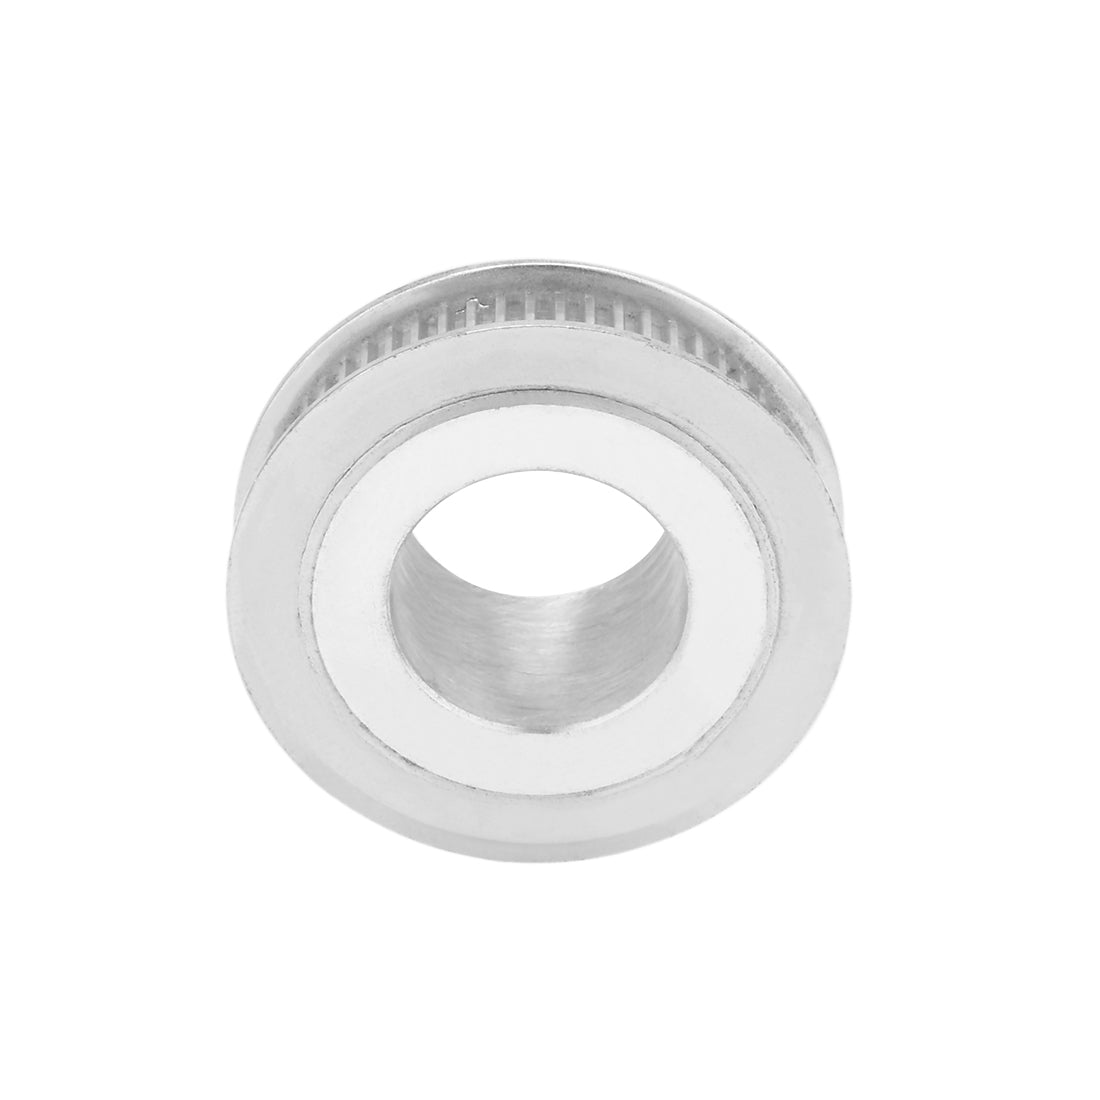 uxcell Uxcell Aluminum M-X-L 60 Teeth 20mm Bore Timing Belt Idler Pulley Synchronous Wheel 6mm Belt for 3D Printer CNC